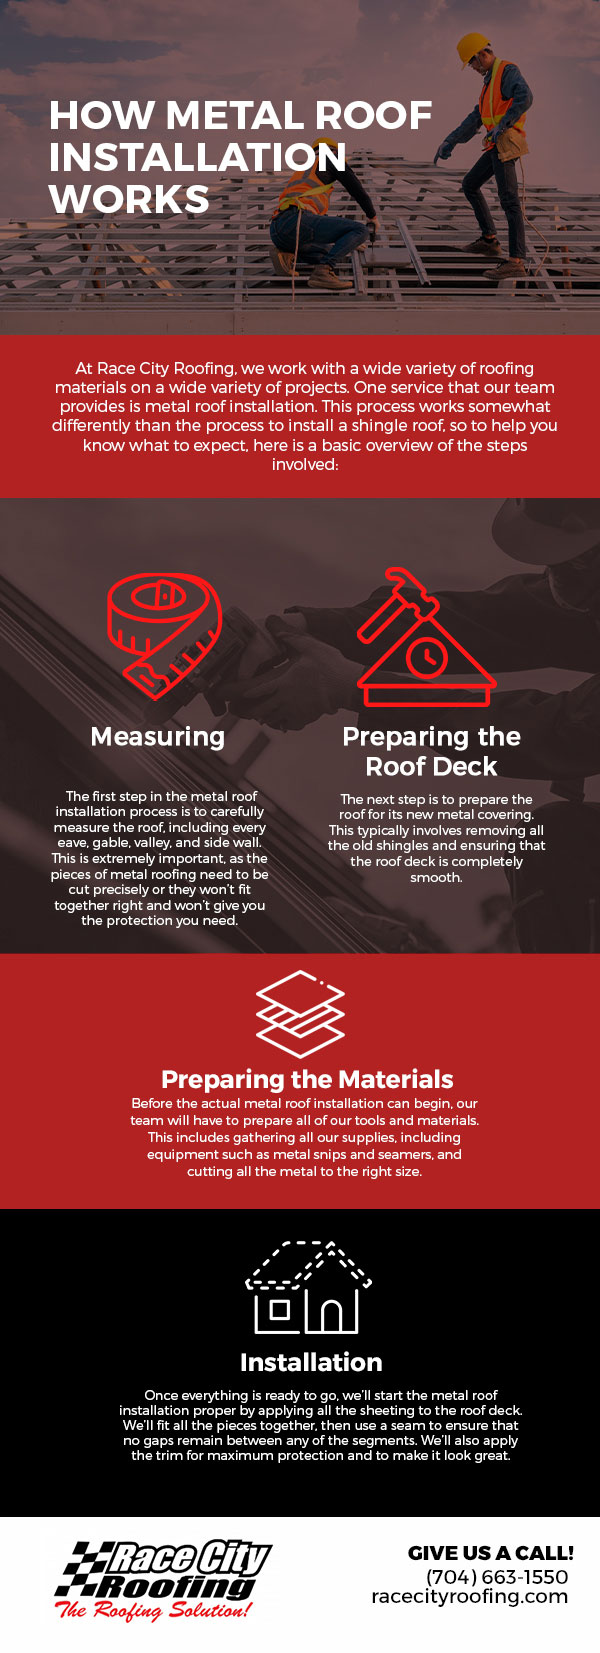 How Metal Roof Installation Works [infographic]